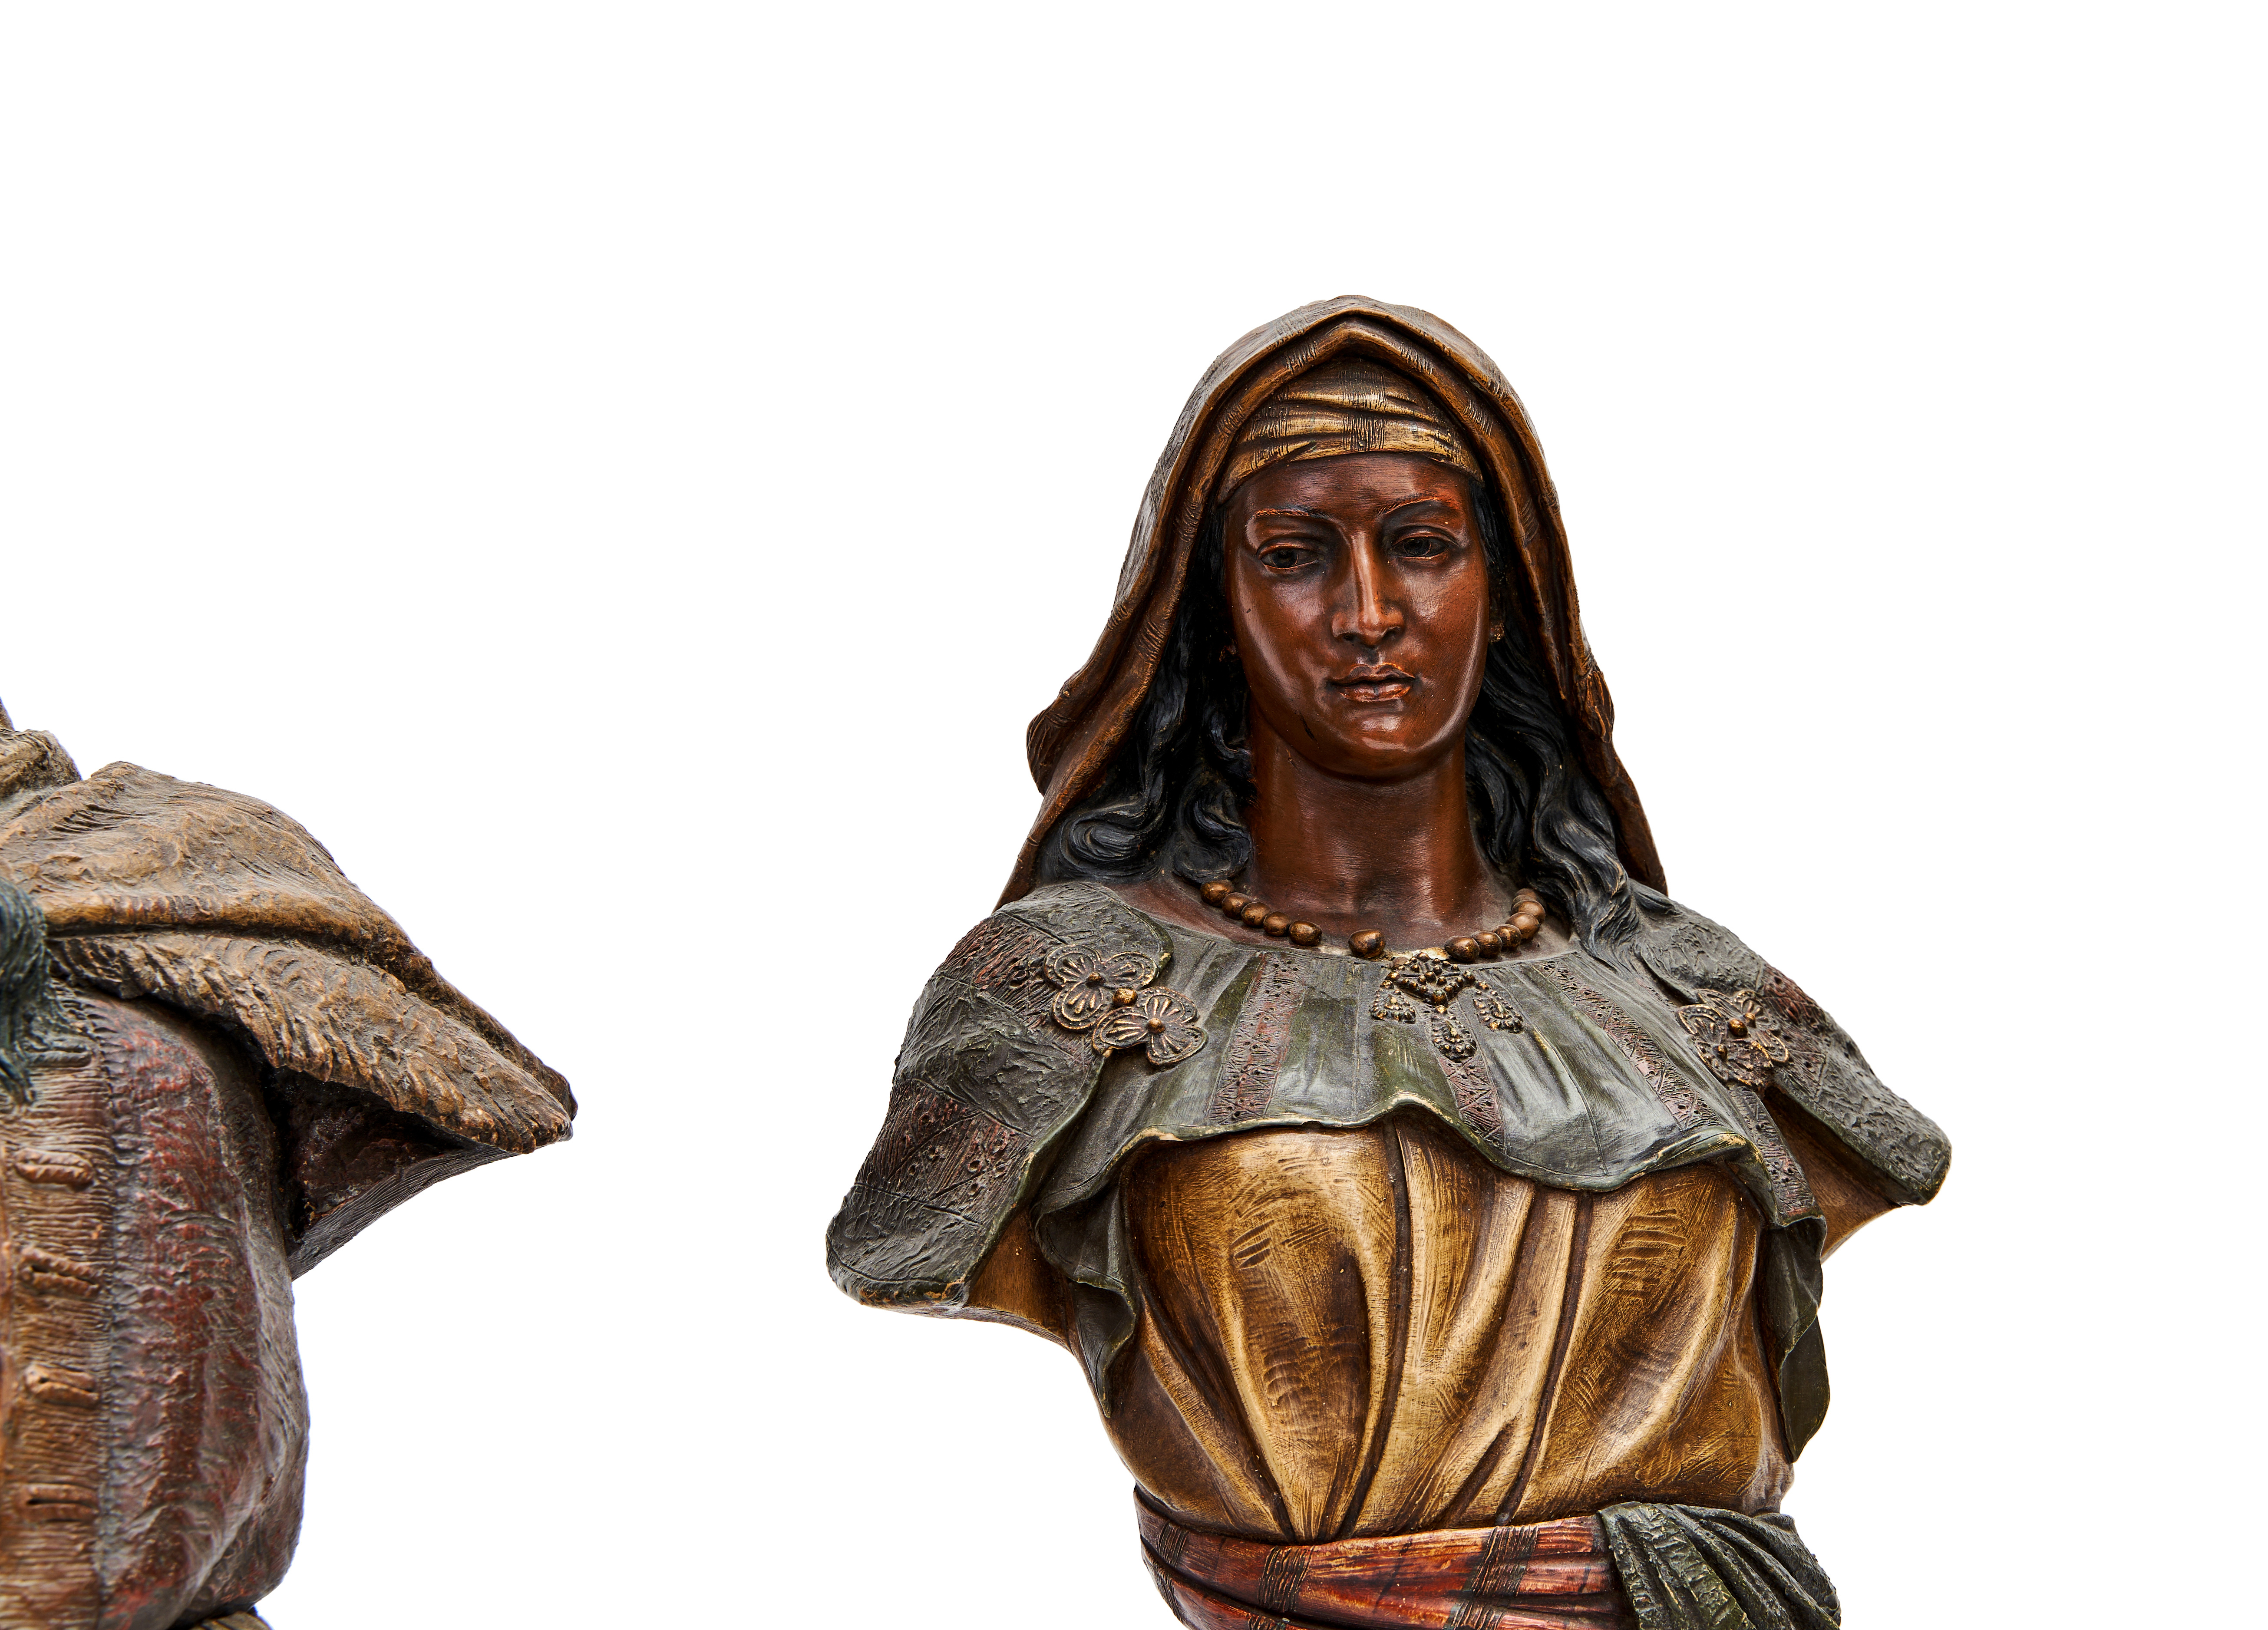 PAIR OF TERRACOTTA ORIENTALISTS BUSTS, SIGNED FRIEDRICH GOLDSCHEIDER, 19TH CENTURY - Image 3 of 3